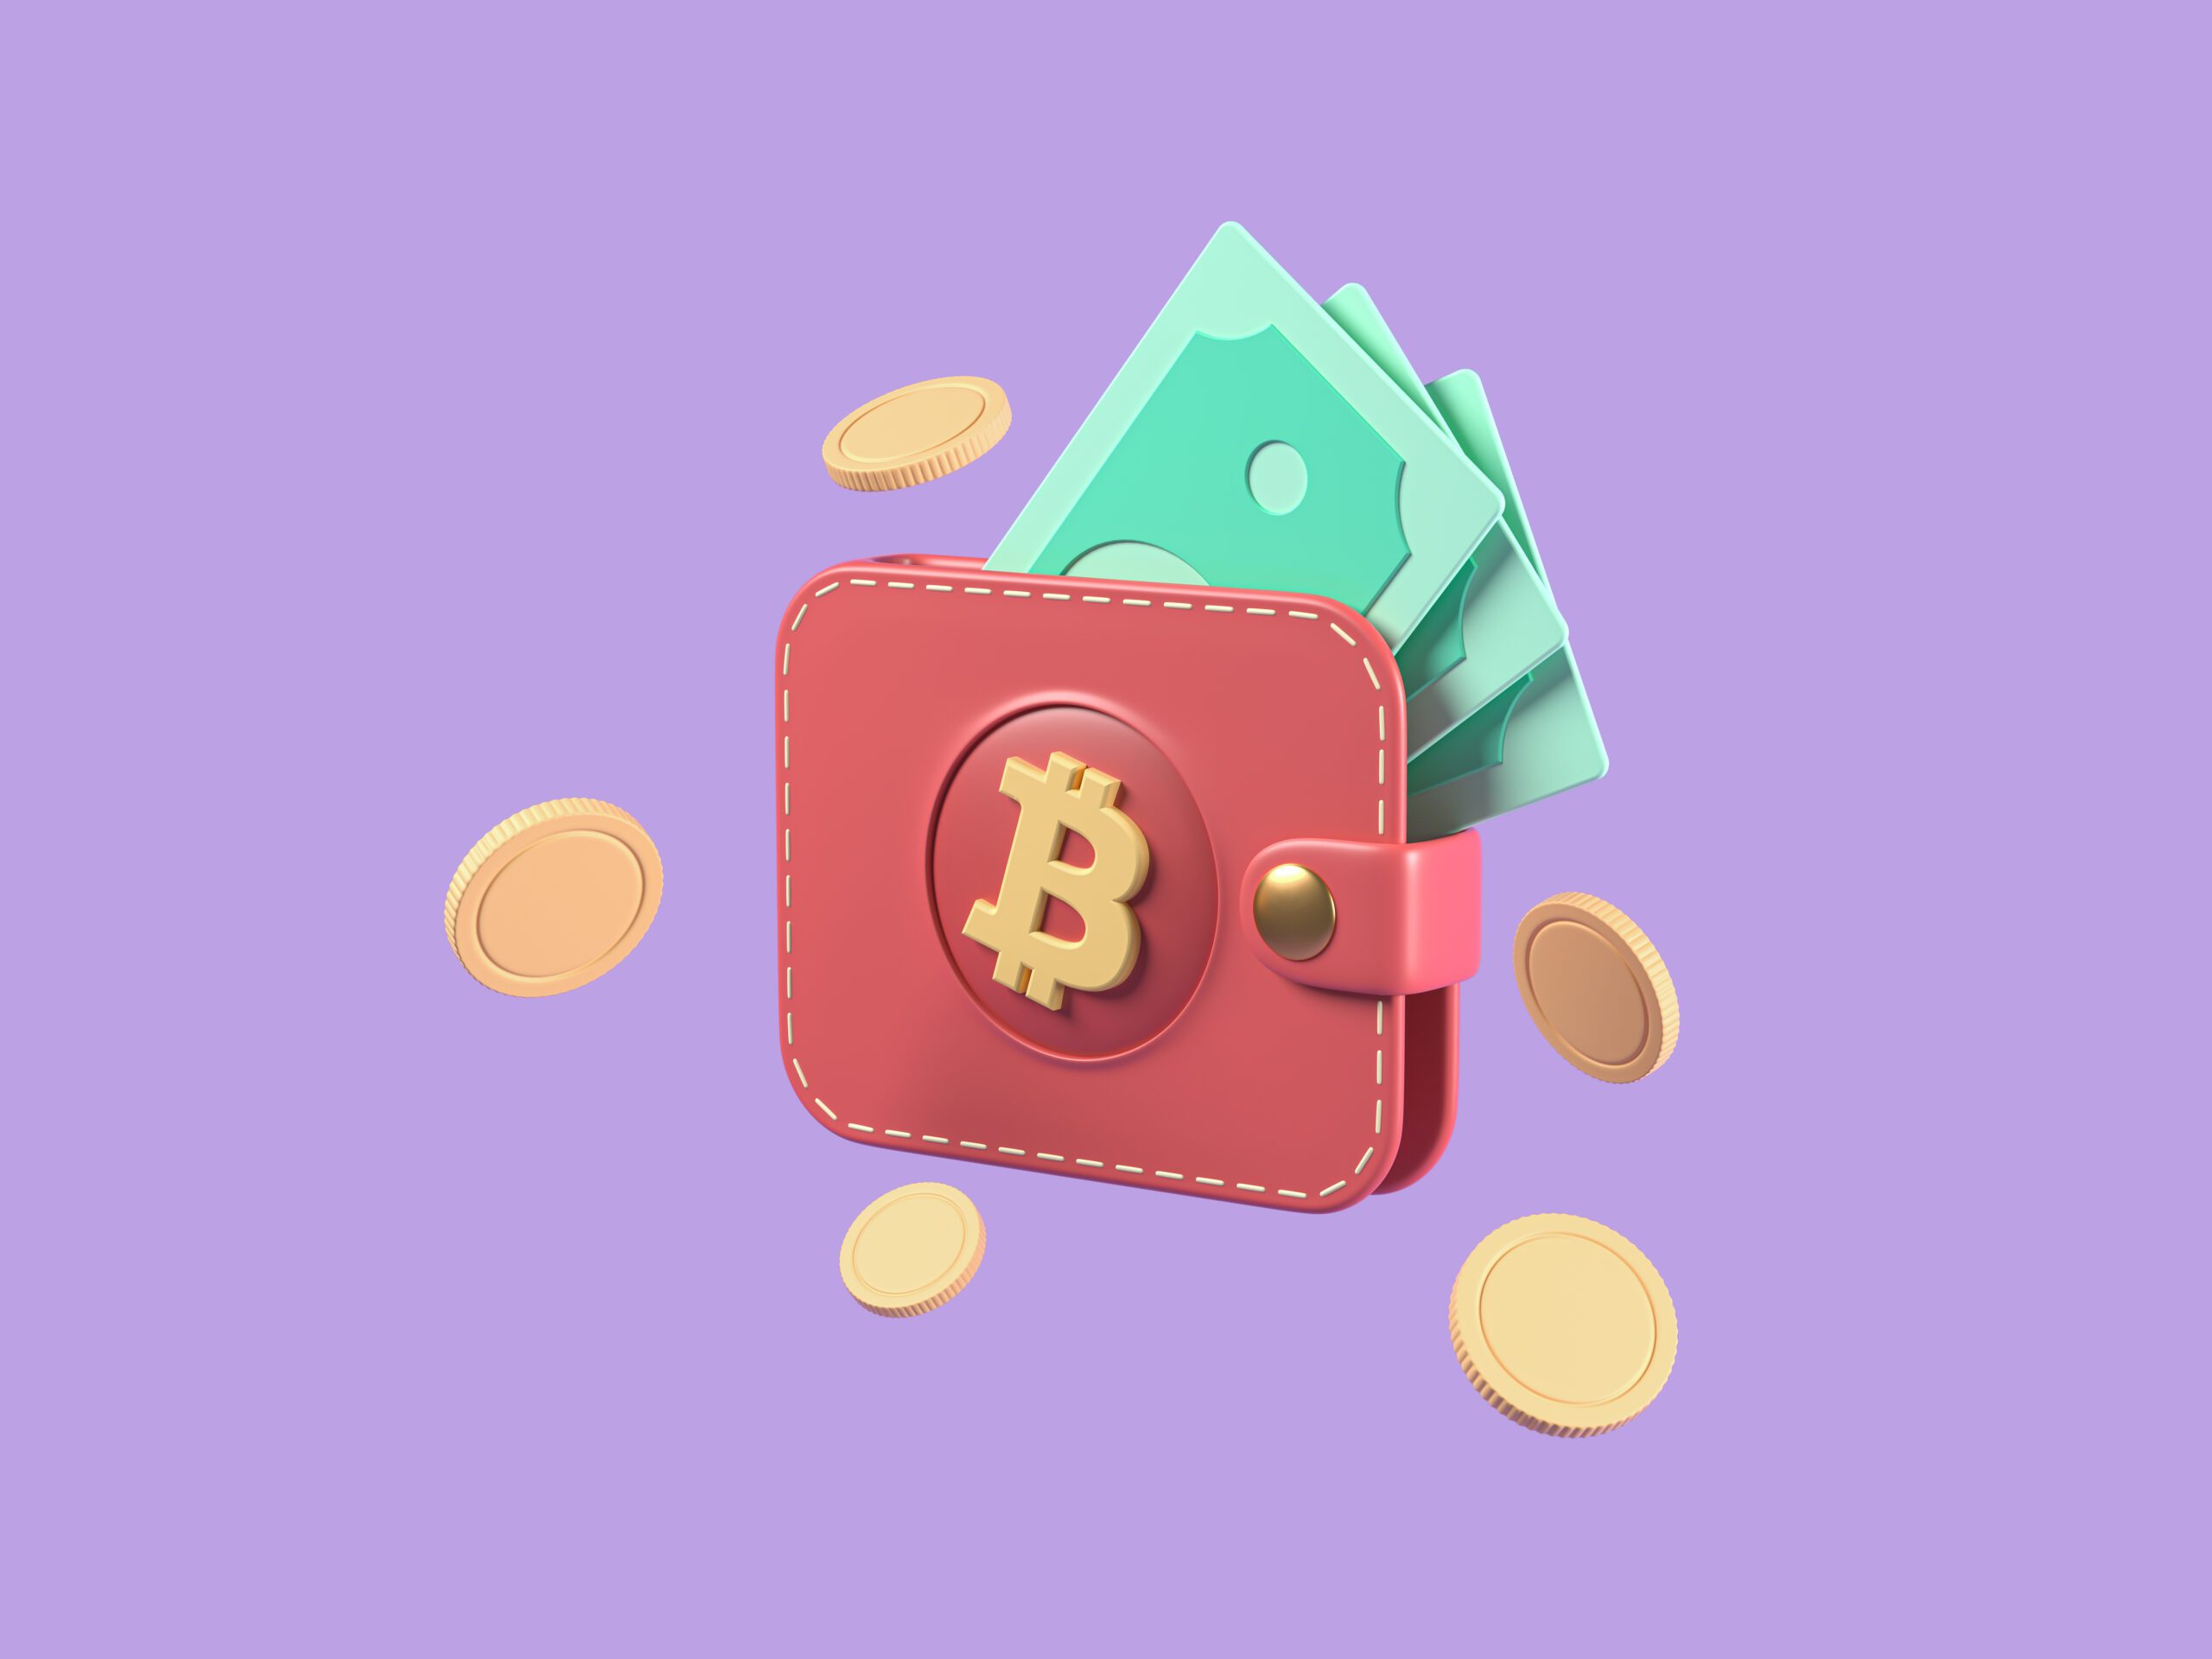 Bitcoin wallet with cash